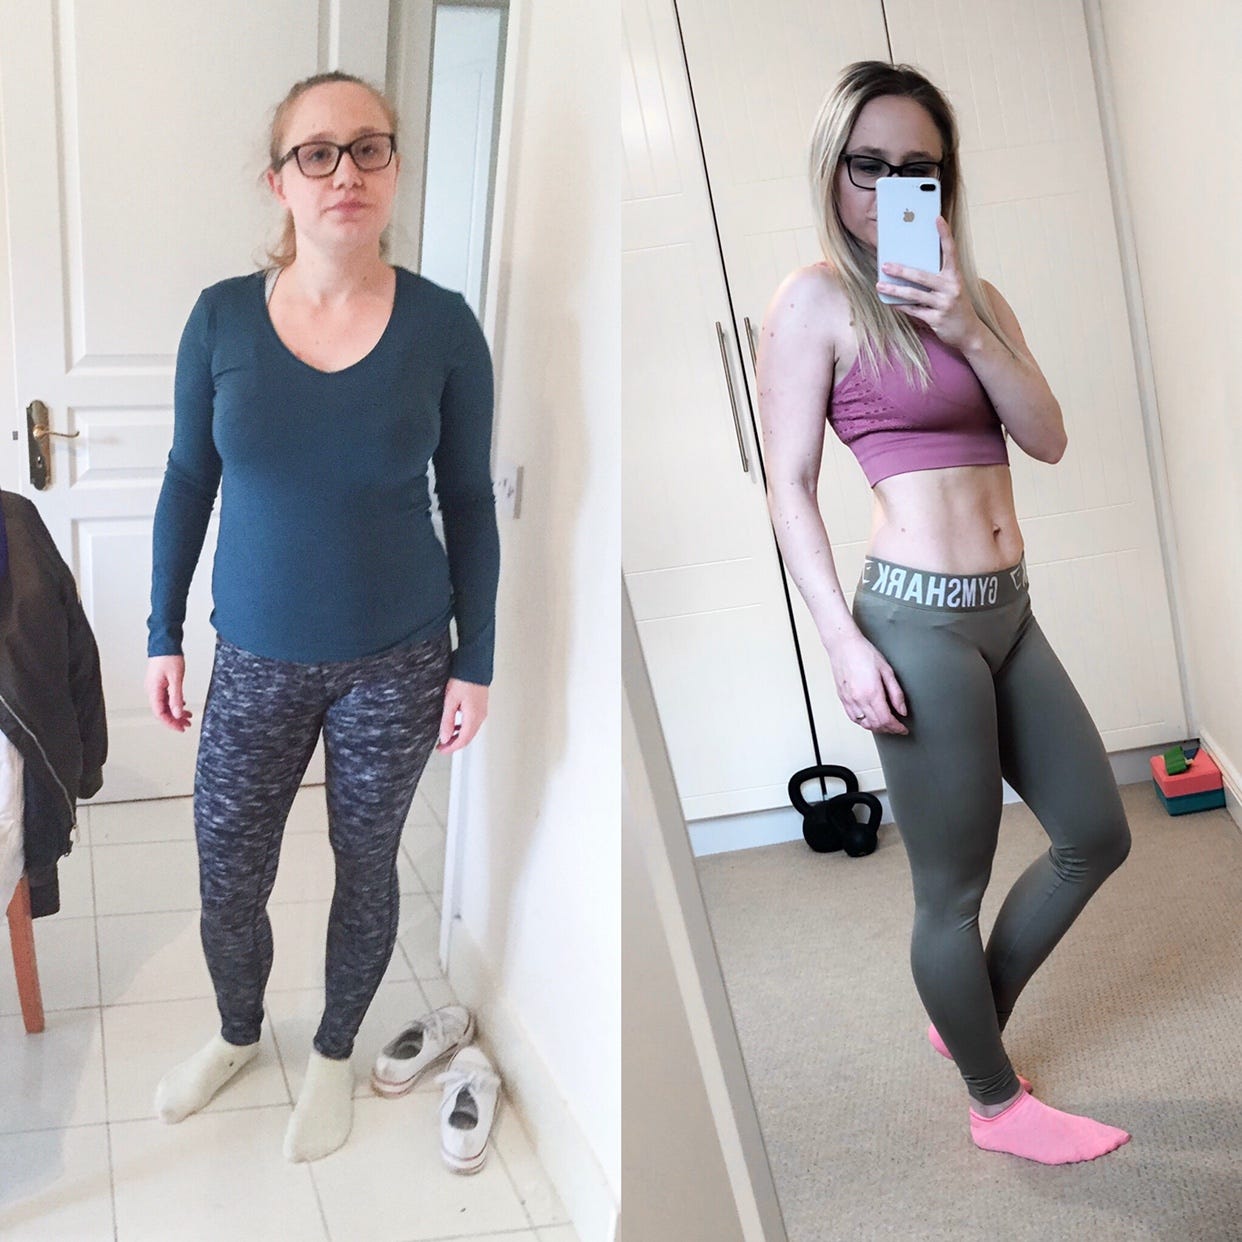 LeCorset - Diastasis Recti - What Is It And Does Shapewear Help?